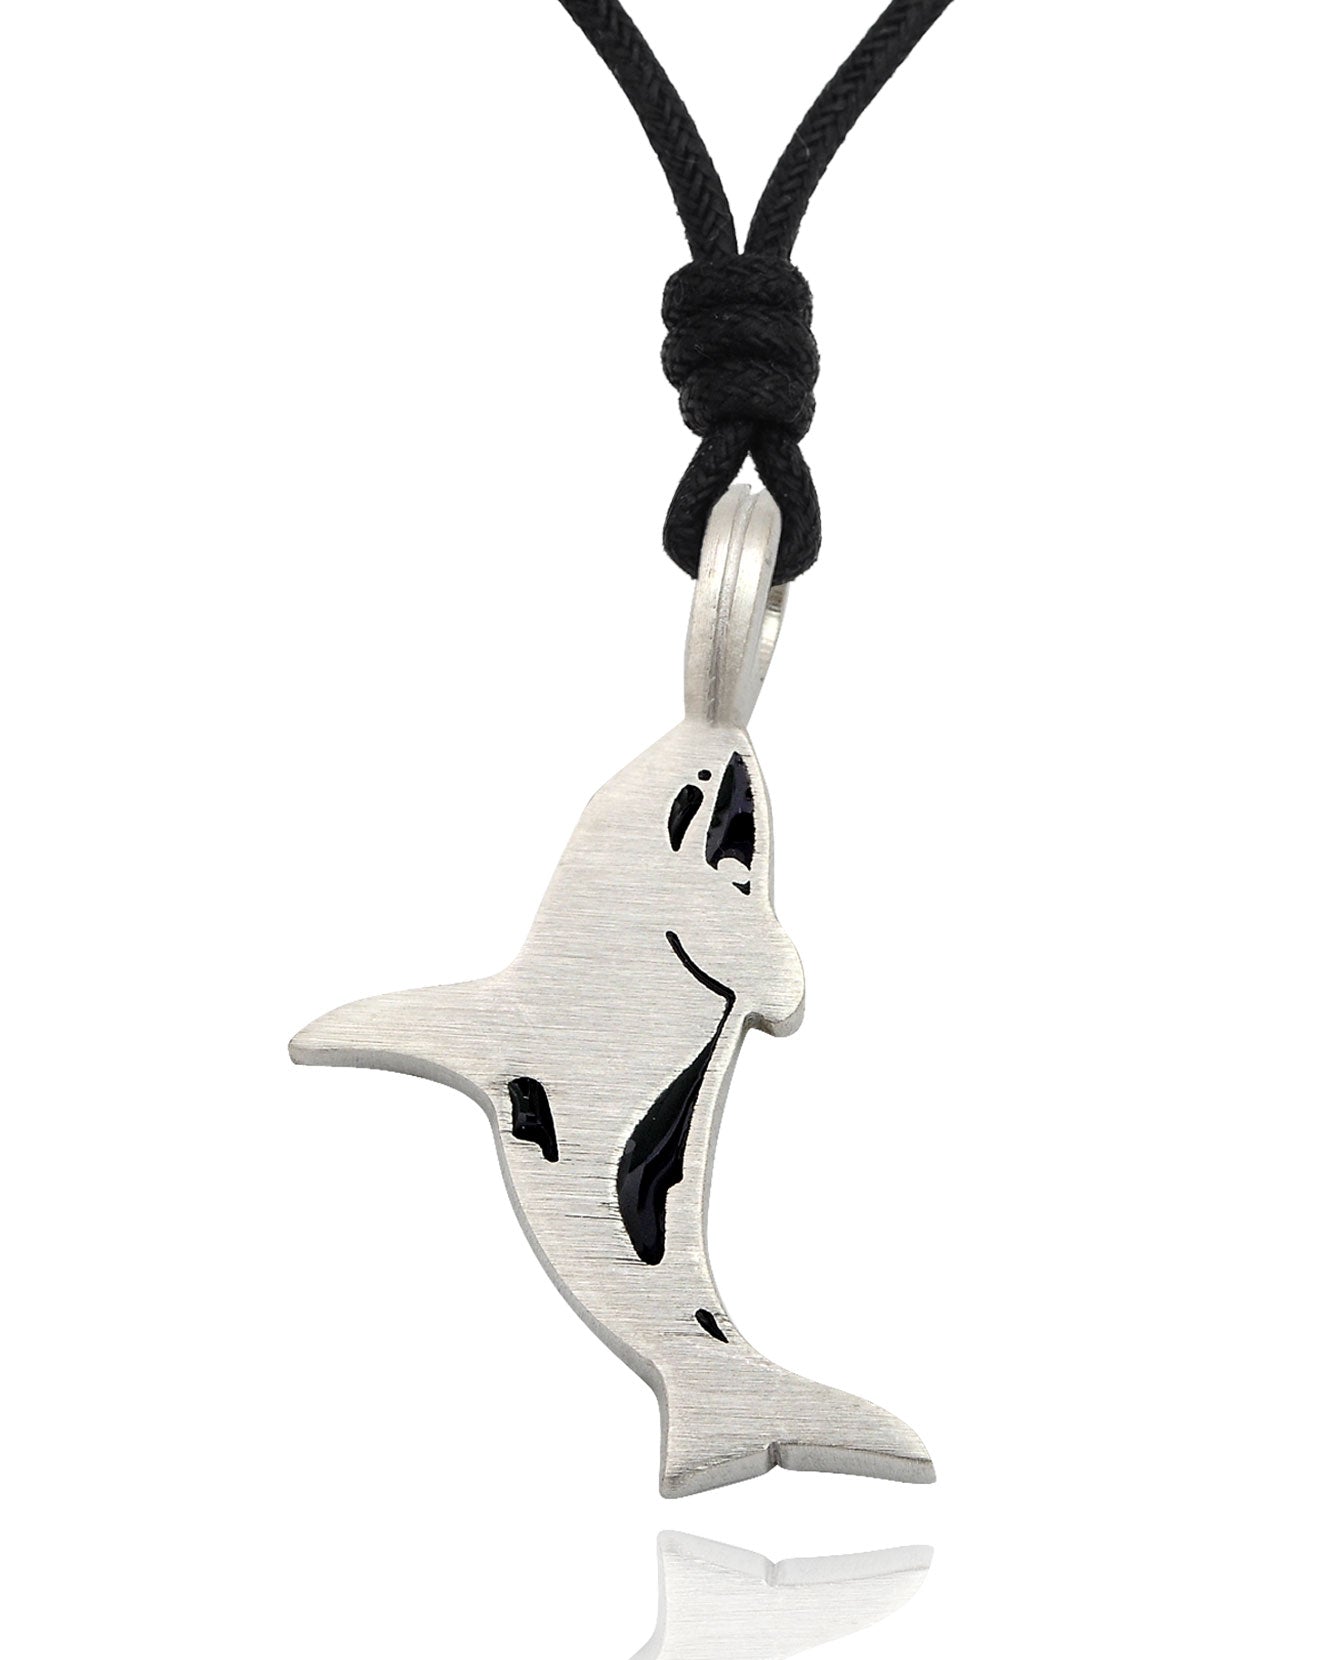 Flat Killer Whale Silver Pewter Charm Necklace Pendant Jewelry With Cotton Cord